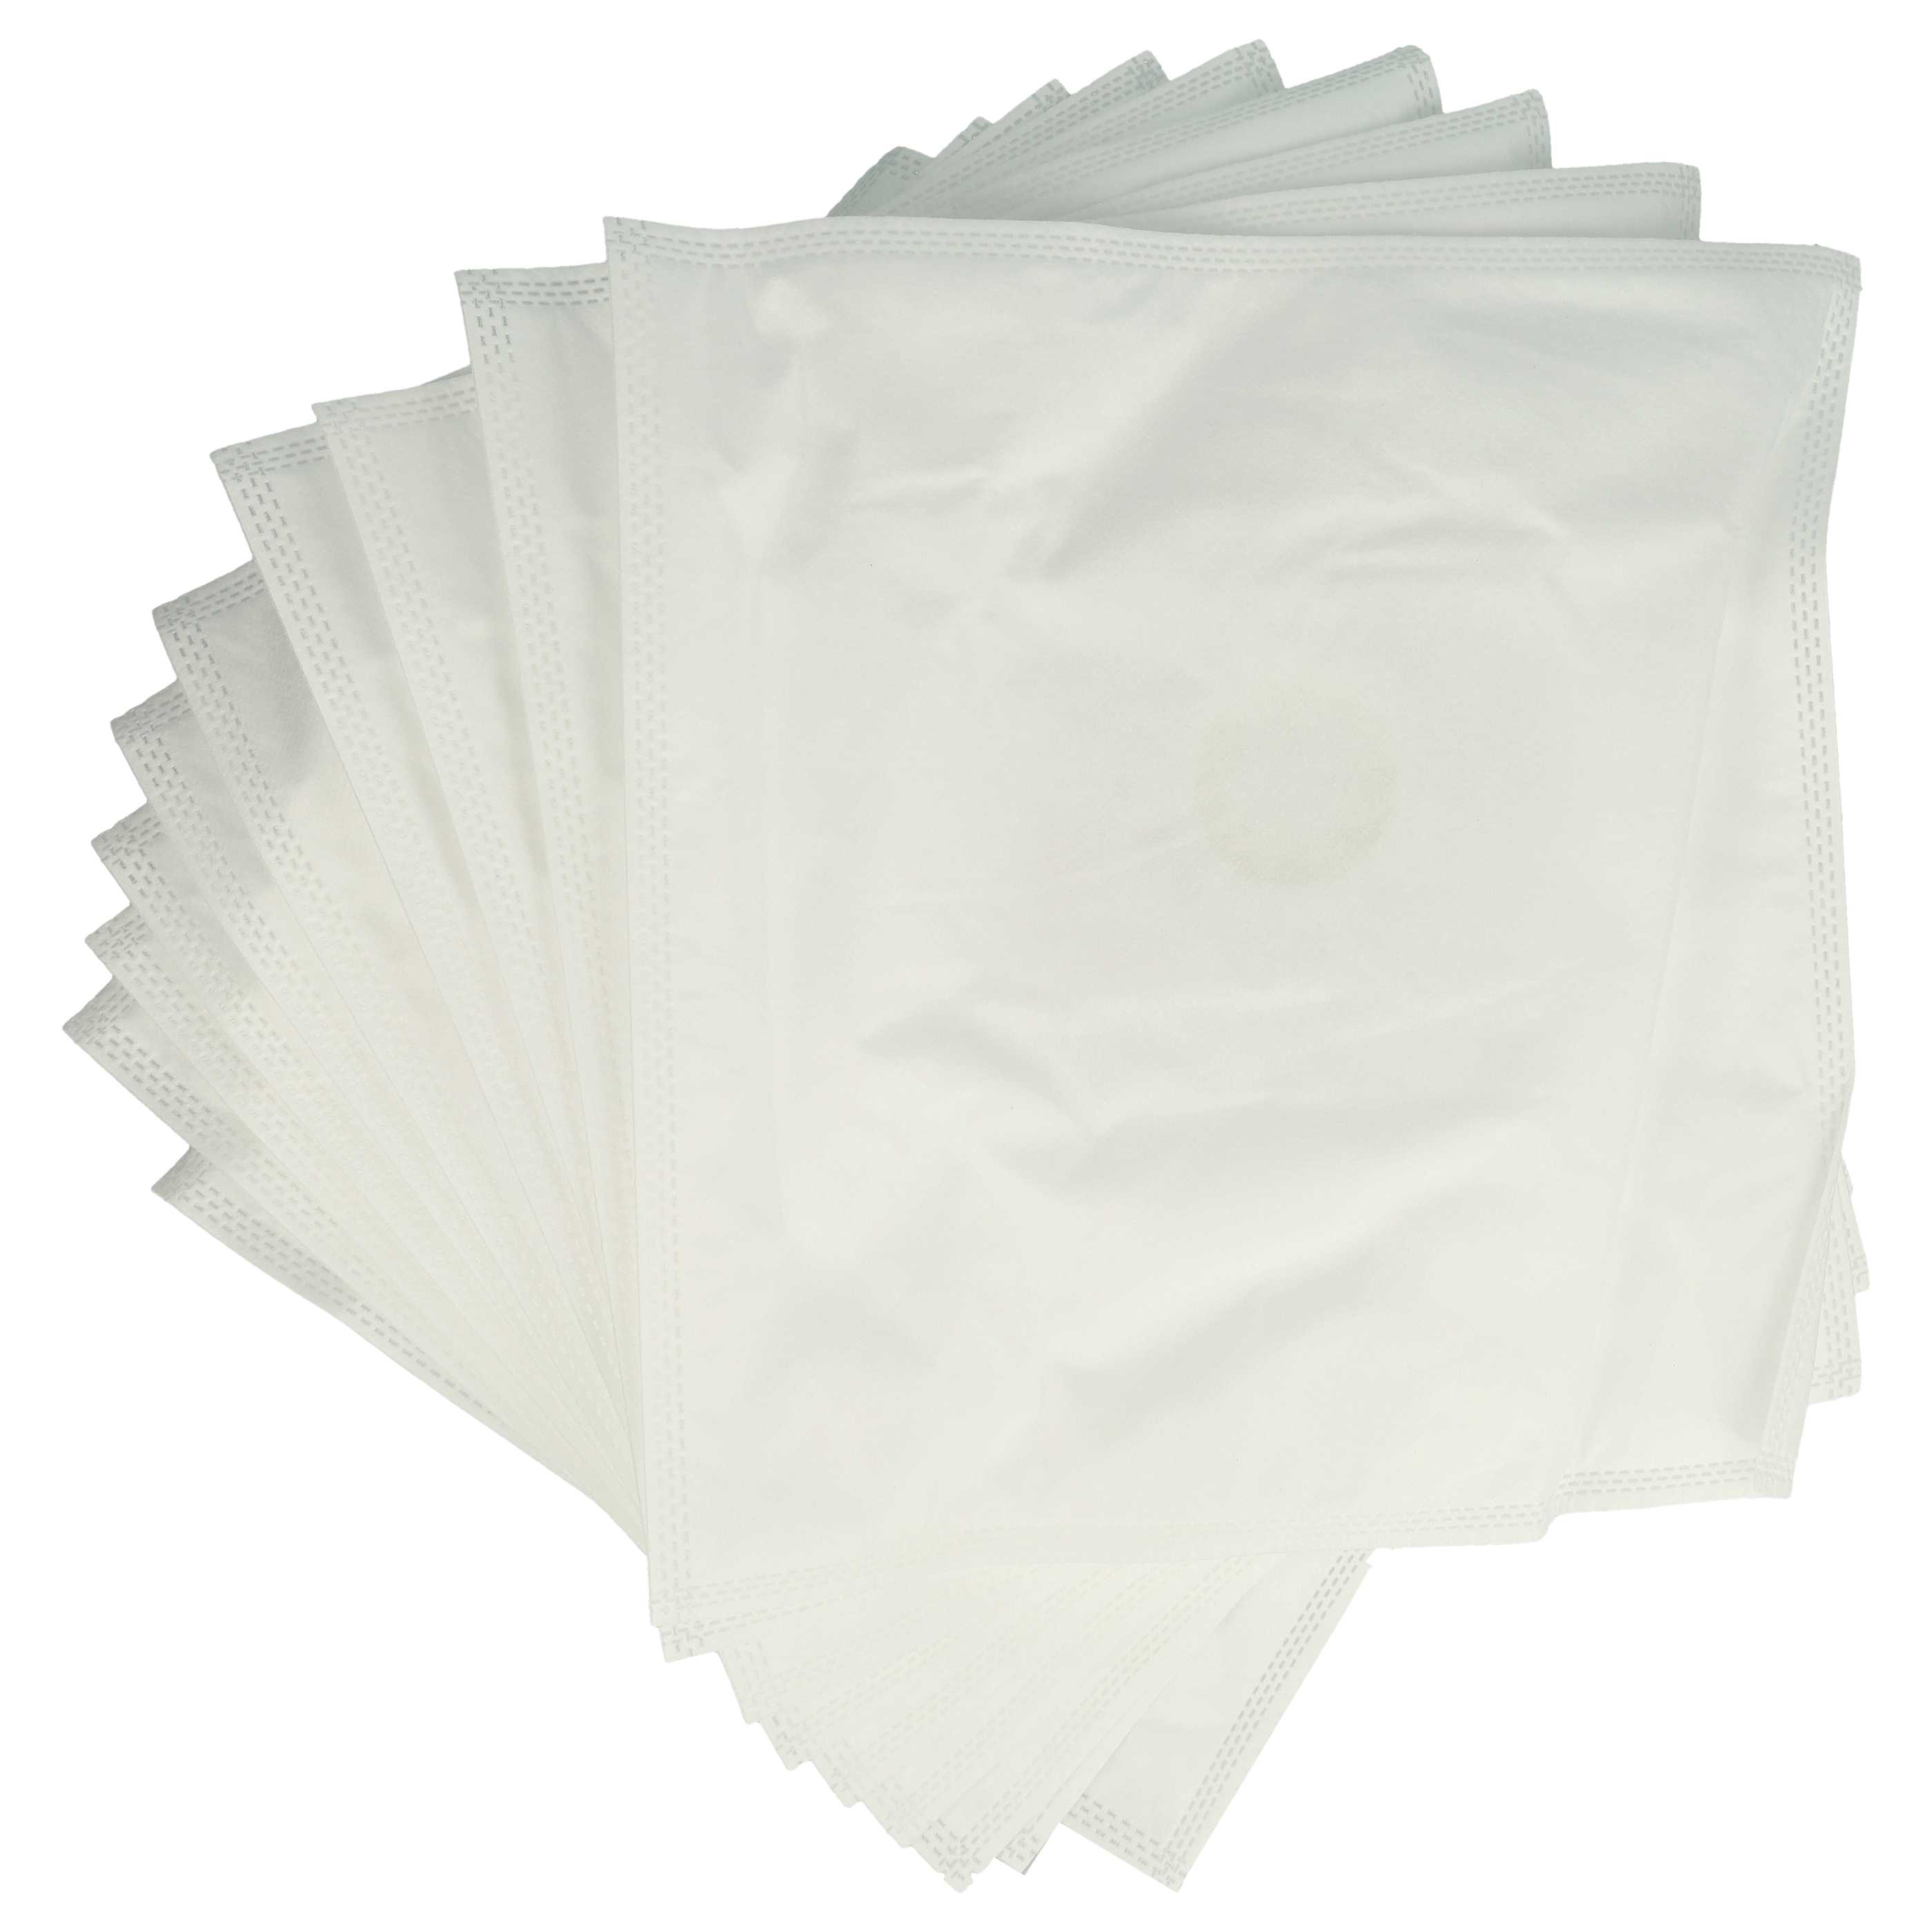 10x Vacuum Cleaner Bag replaces Moulinex 9A82030 for Moulinex - microfleece